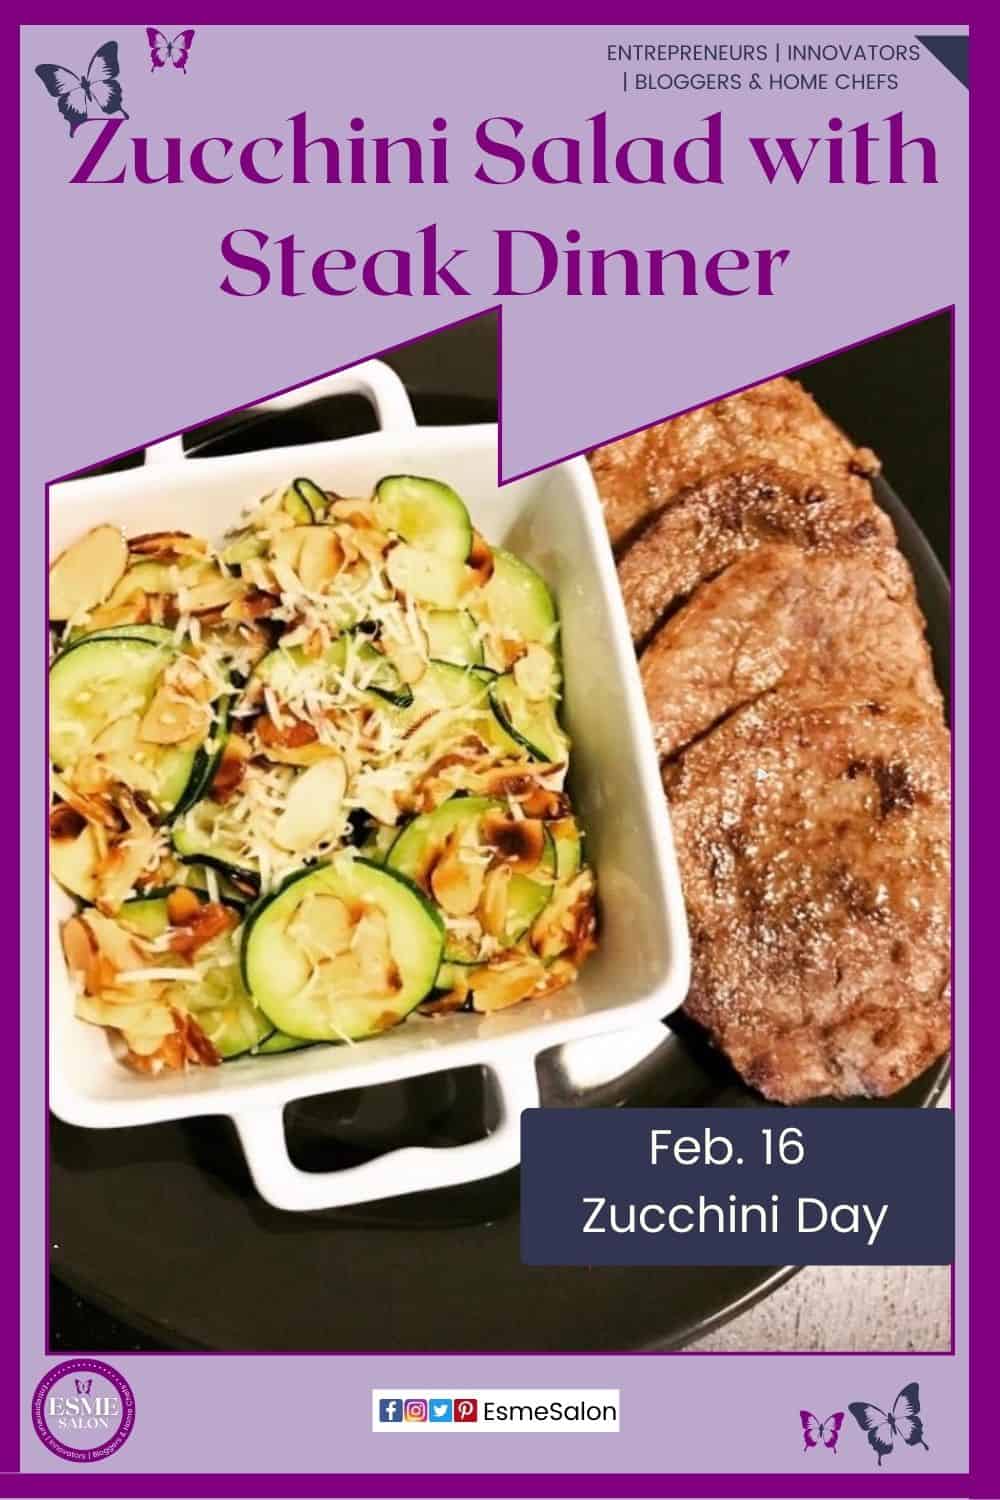 an image of a white square dish with Zucchini Salad served with steak dinner